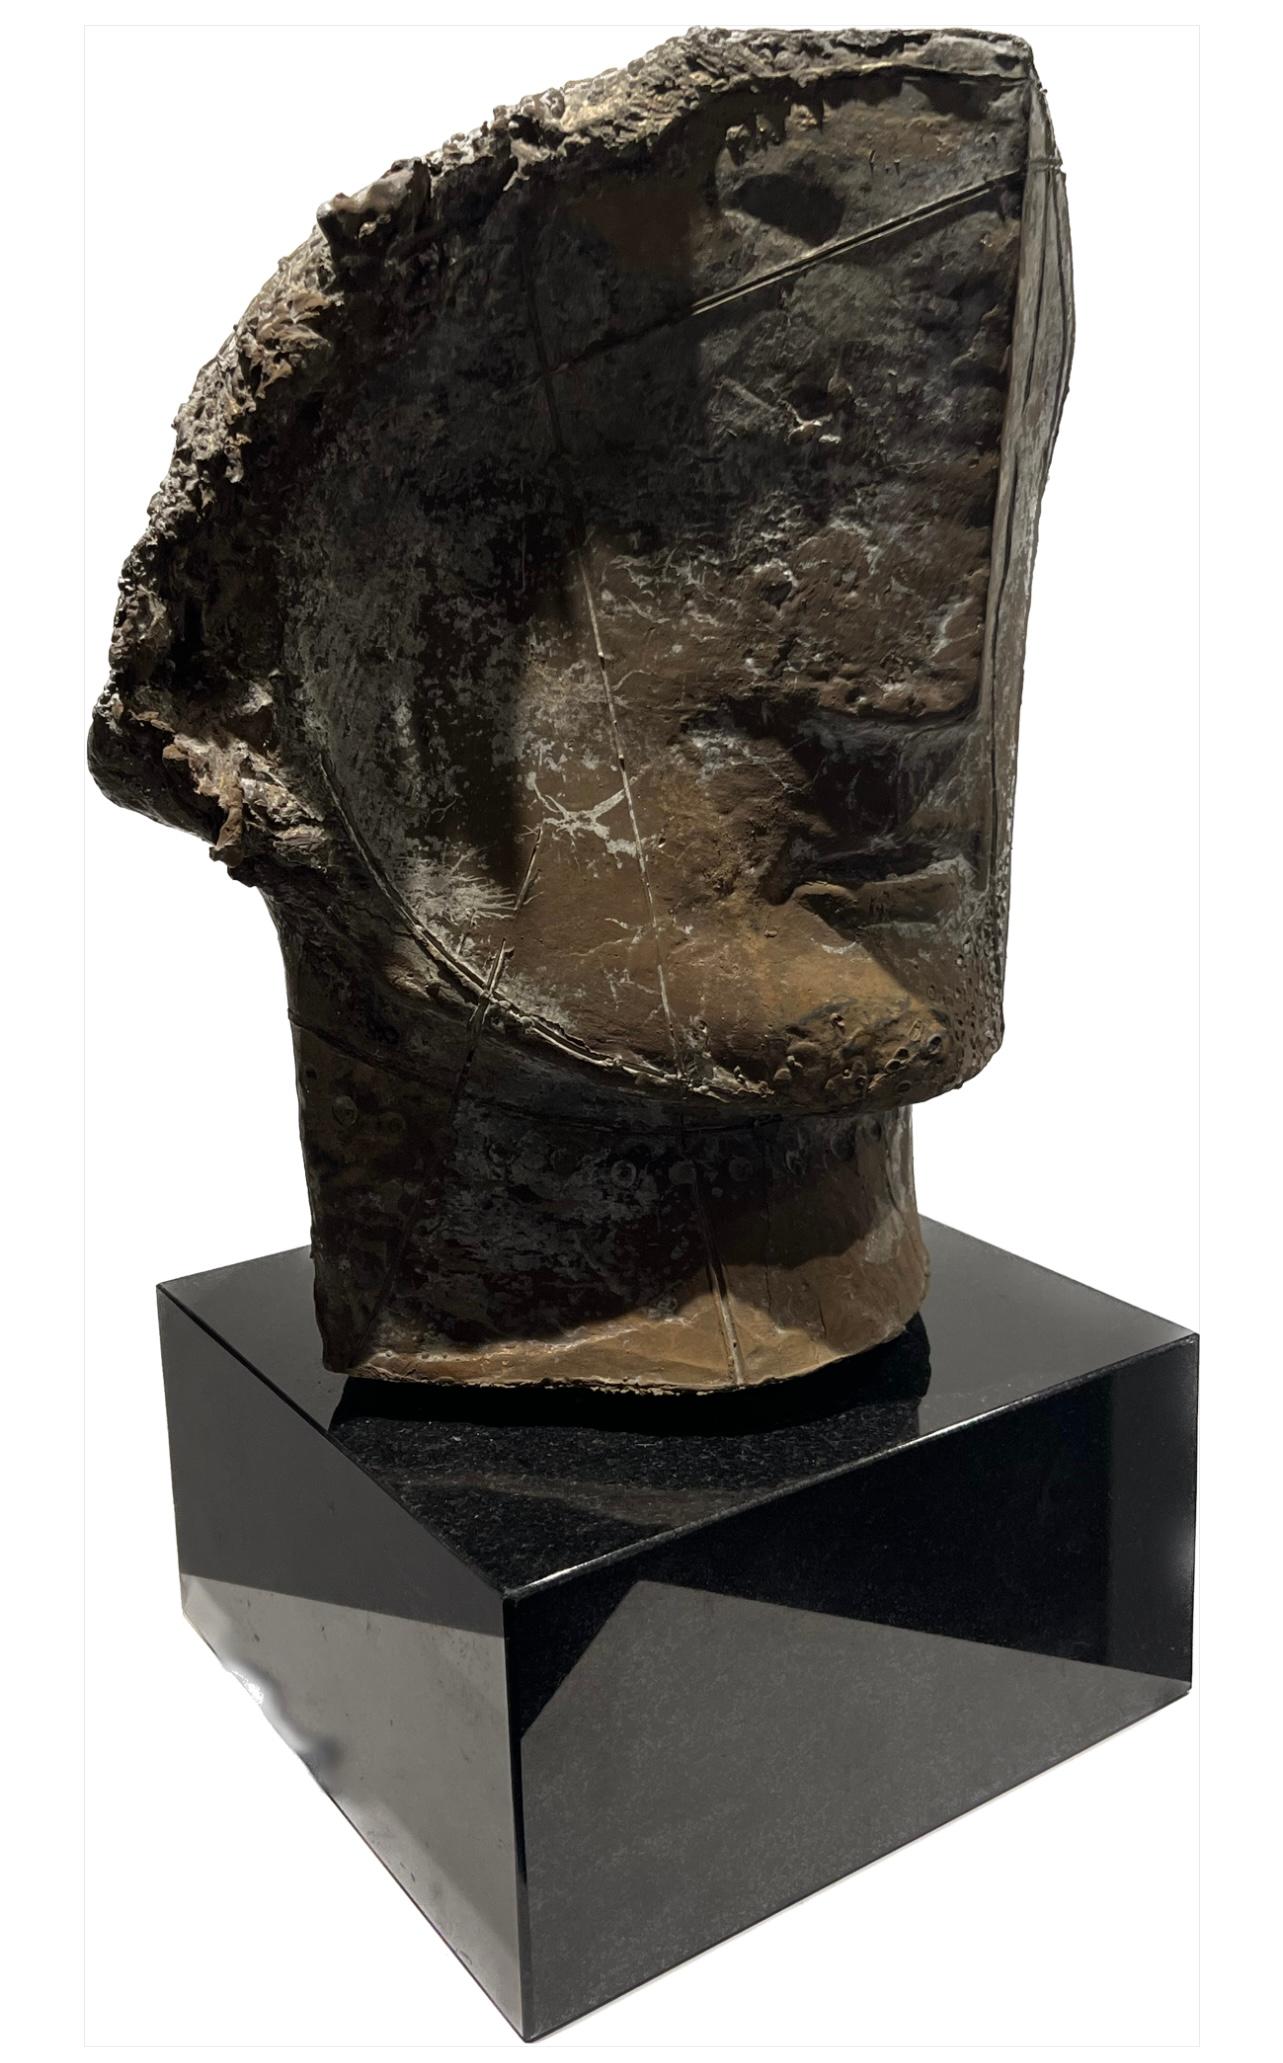 Thomas Junghans Figurative Sculpture - Inner Circle Casting Scale Bronze Sculpture Abstract Head Limited Edition